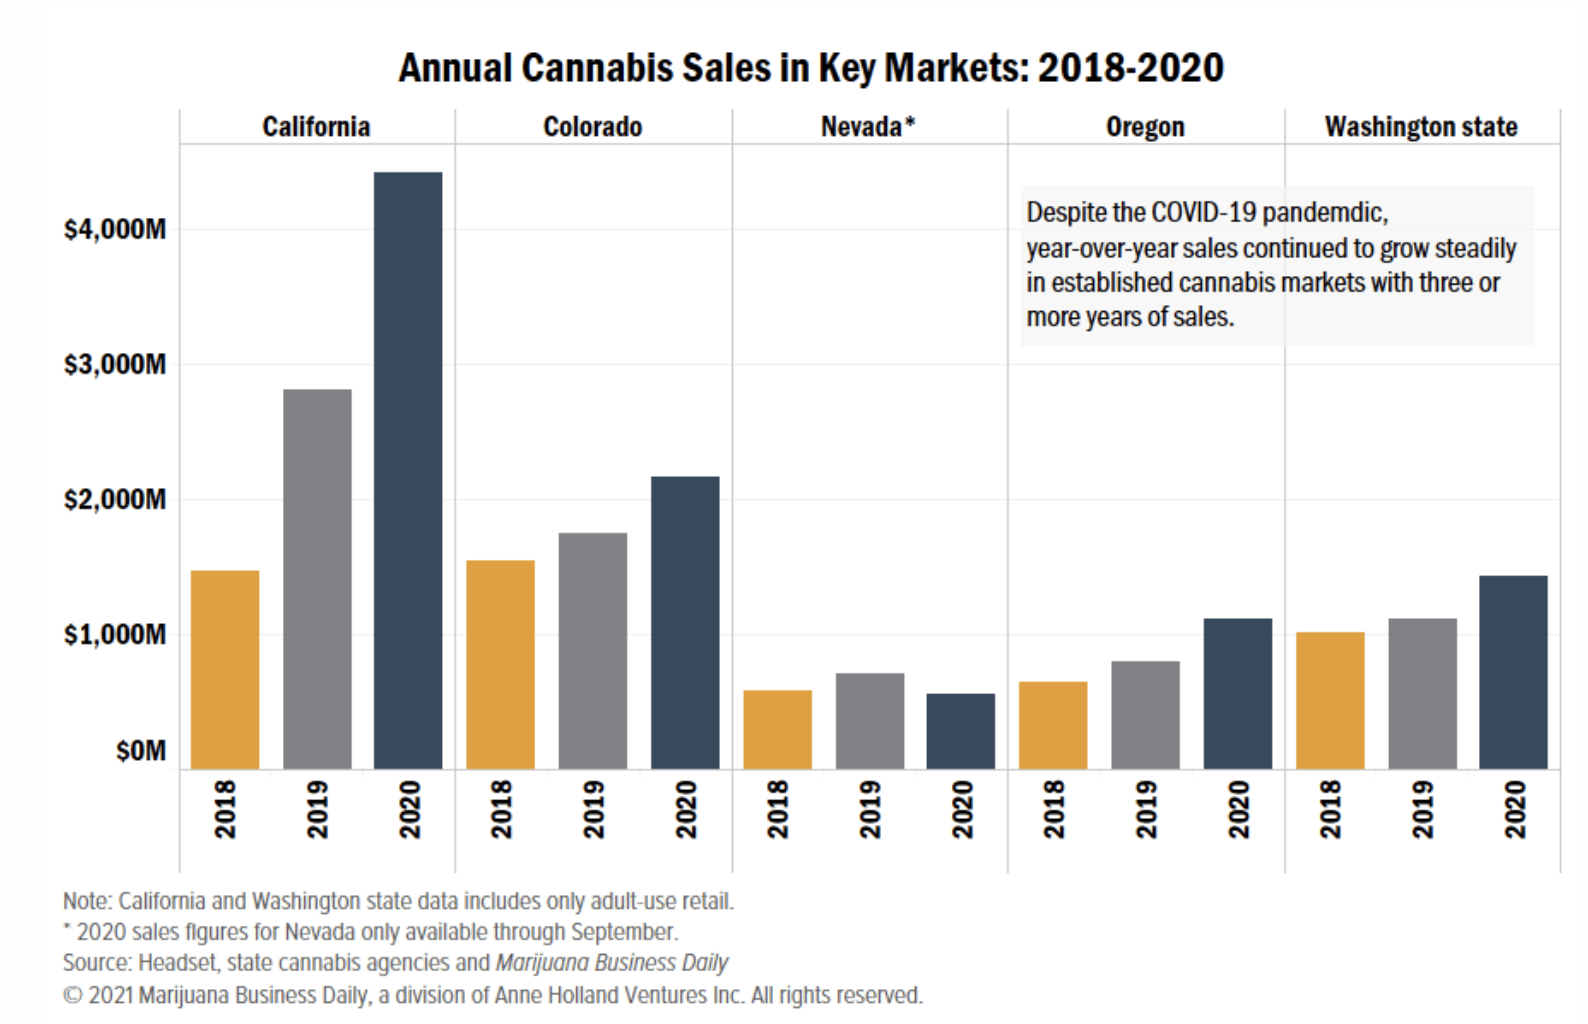 Several key cannabis markets crushed prior sales records in 2020